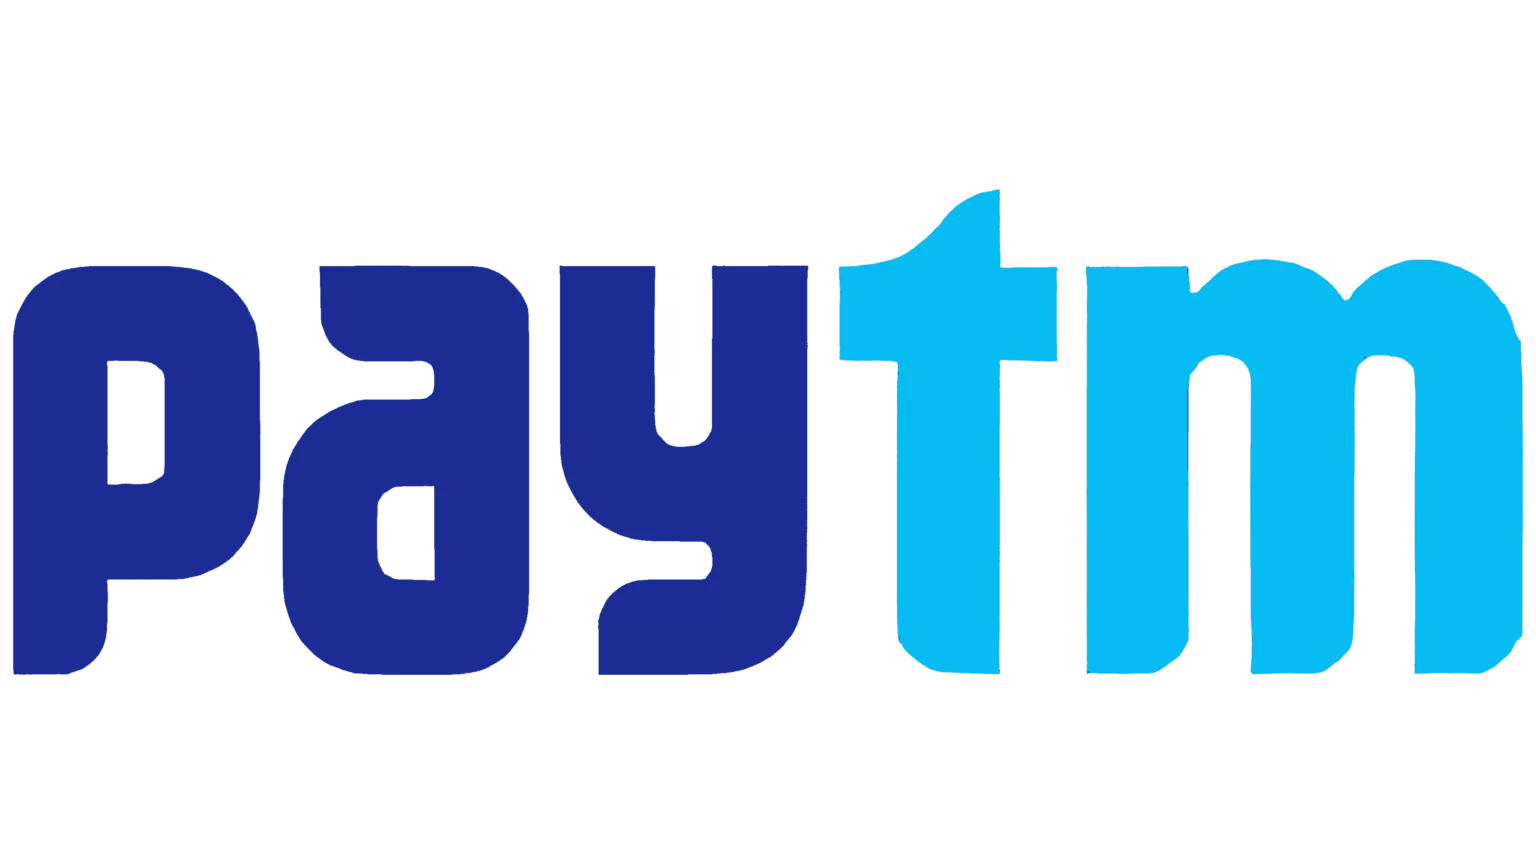 Deposit and withdrwal with Paytm
